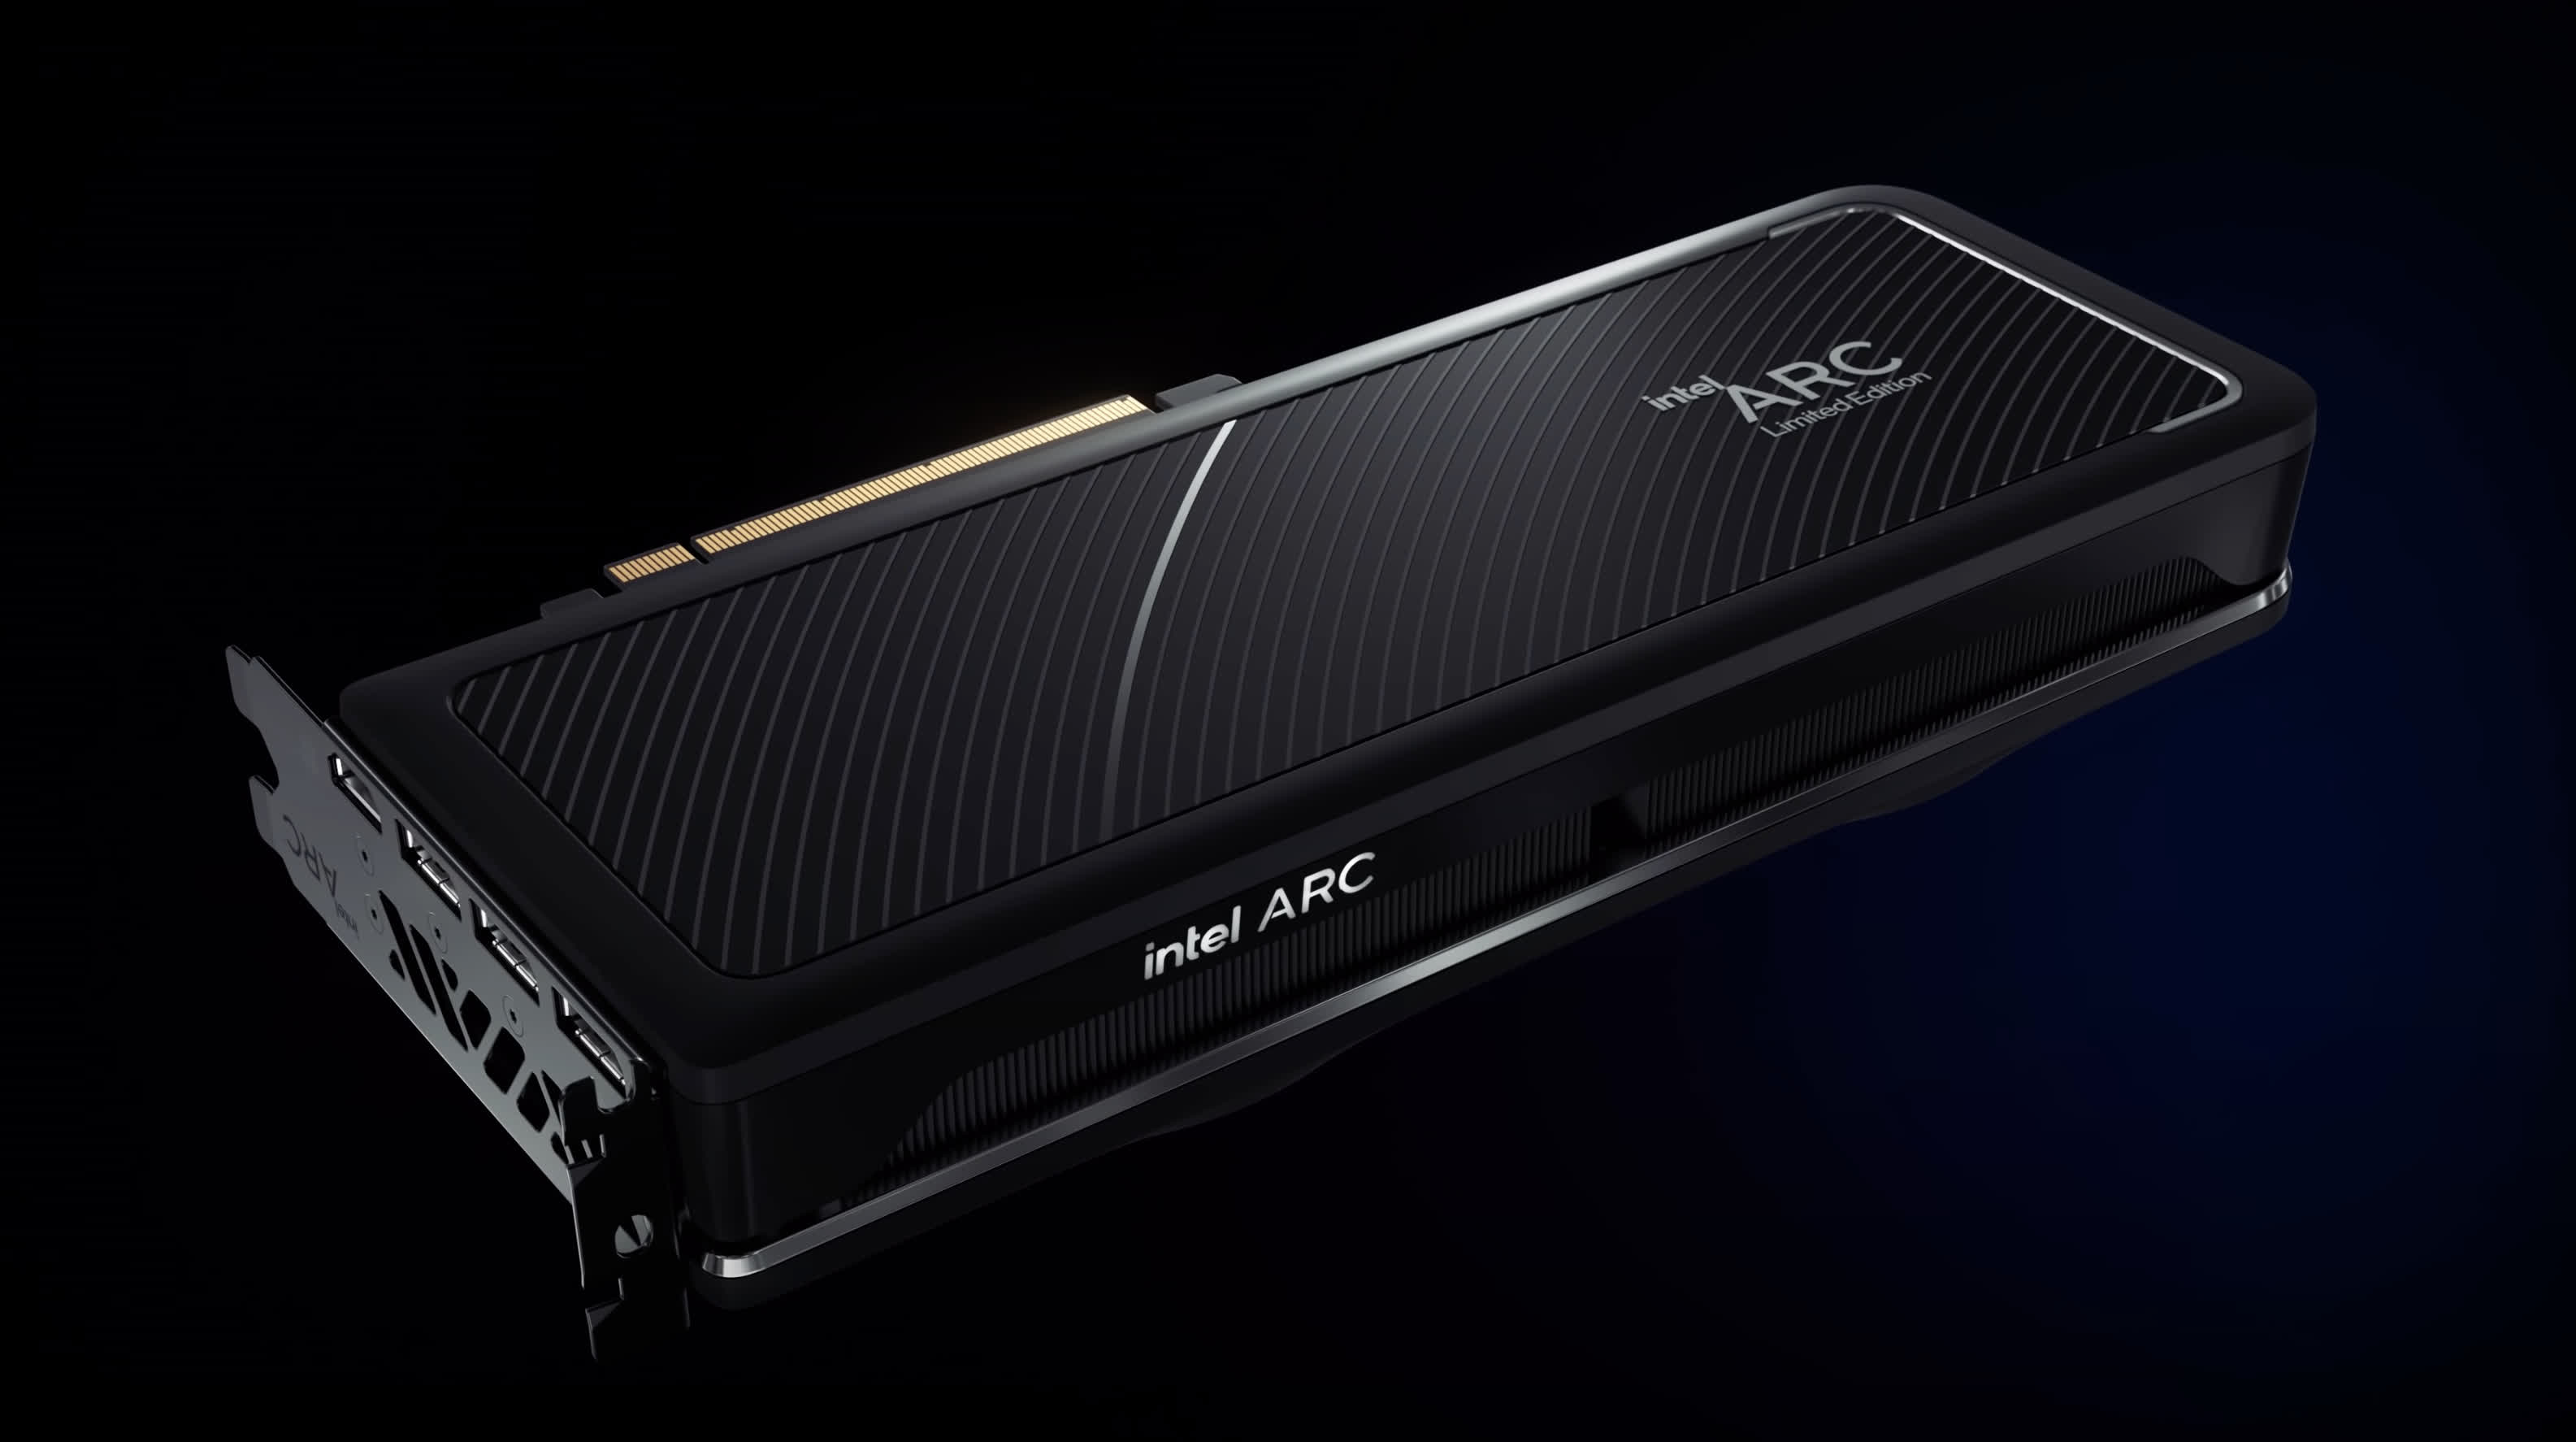 Intel Arc scavenger hunt prizes suggest the graphics cards will be expensive at launch